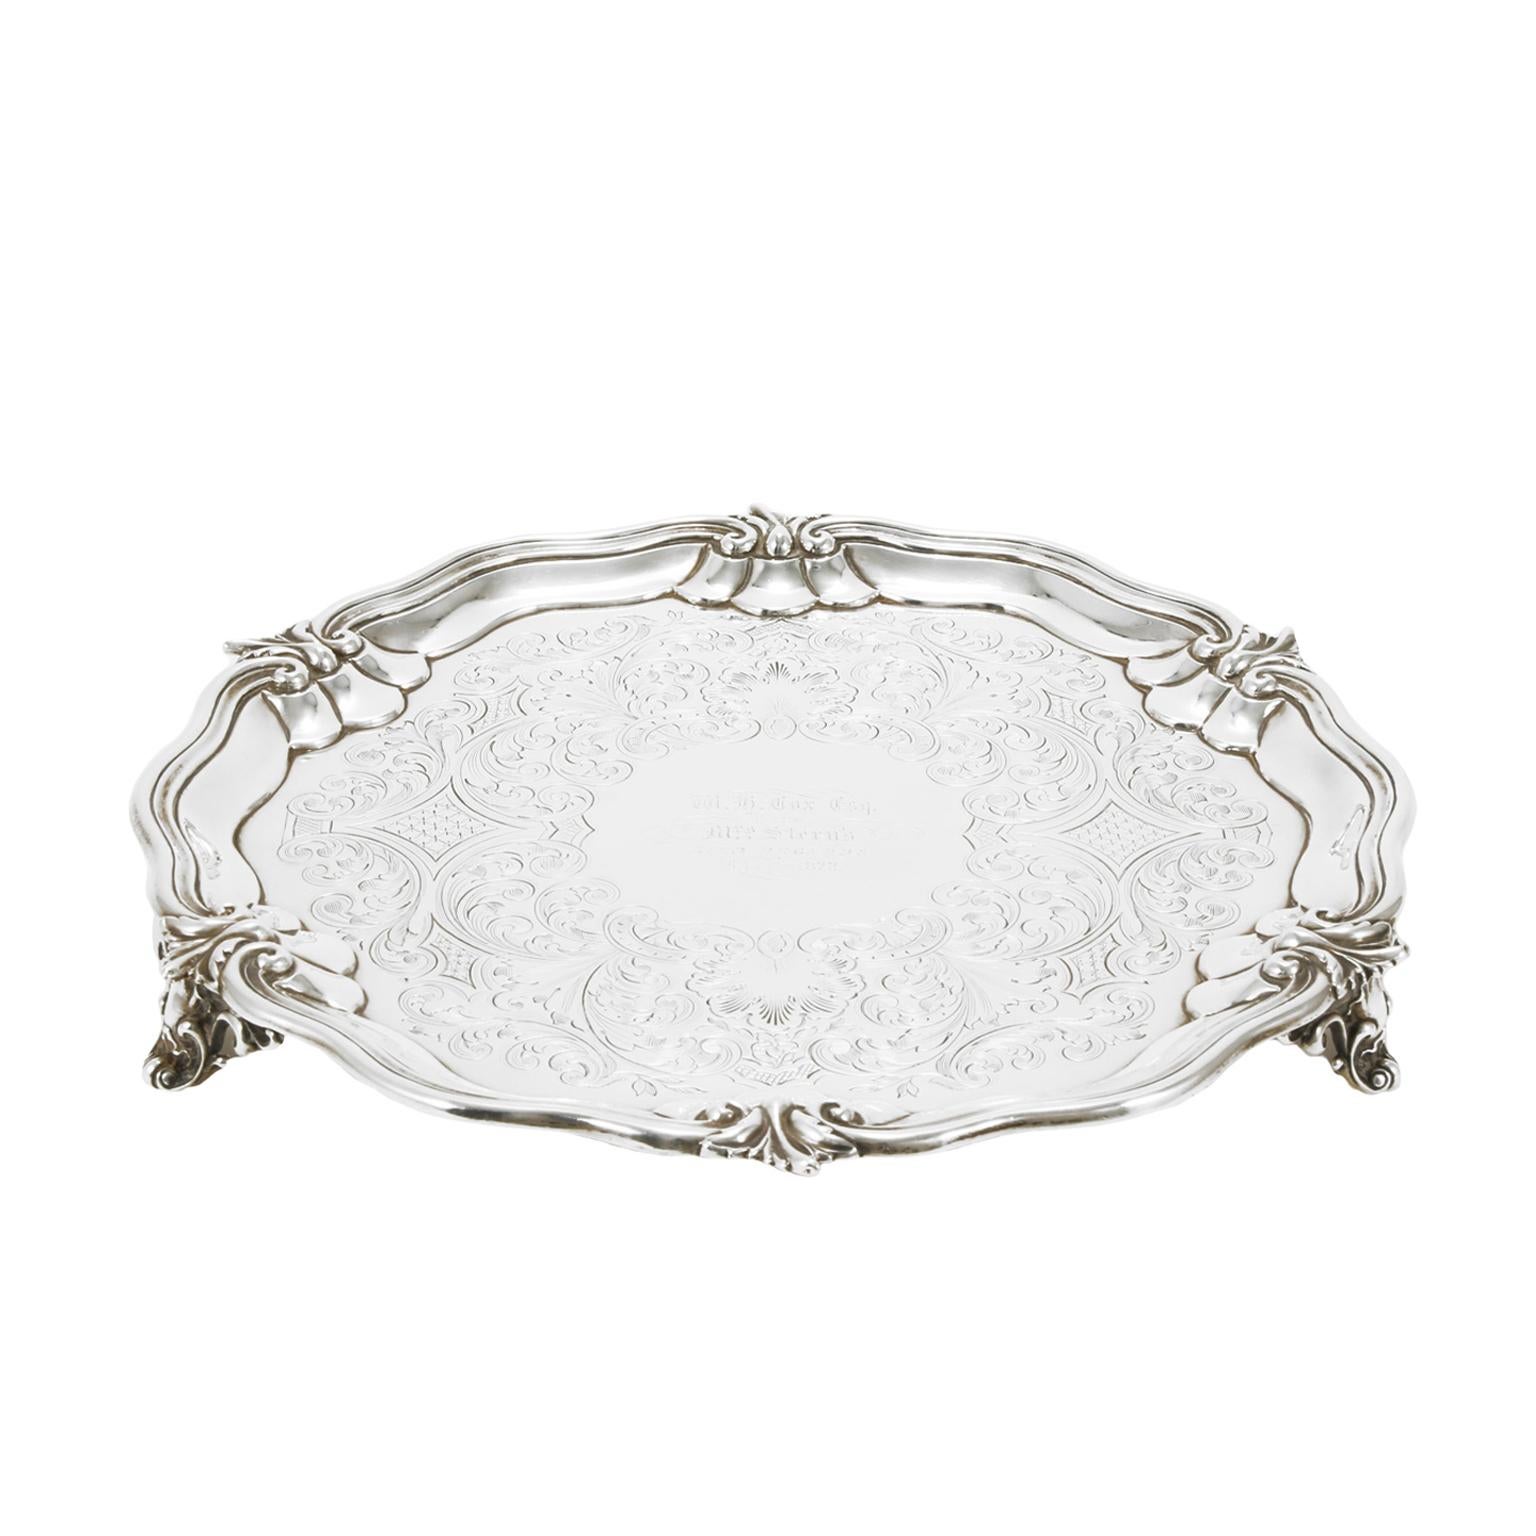 Original silver tray by Charles Reily & George Storer. Produced in 1841, in London, GB, during the Queen Victoria period. It has a contoured lip and an internal engraving with hand floral motifs and a dedication to the center. Sterling silver 925%.